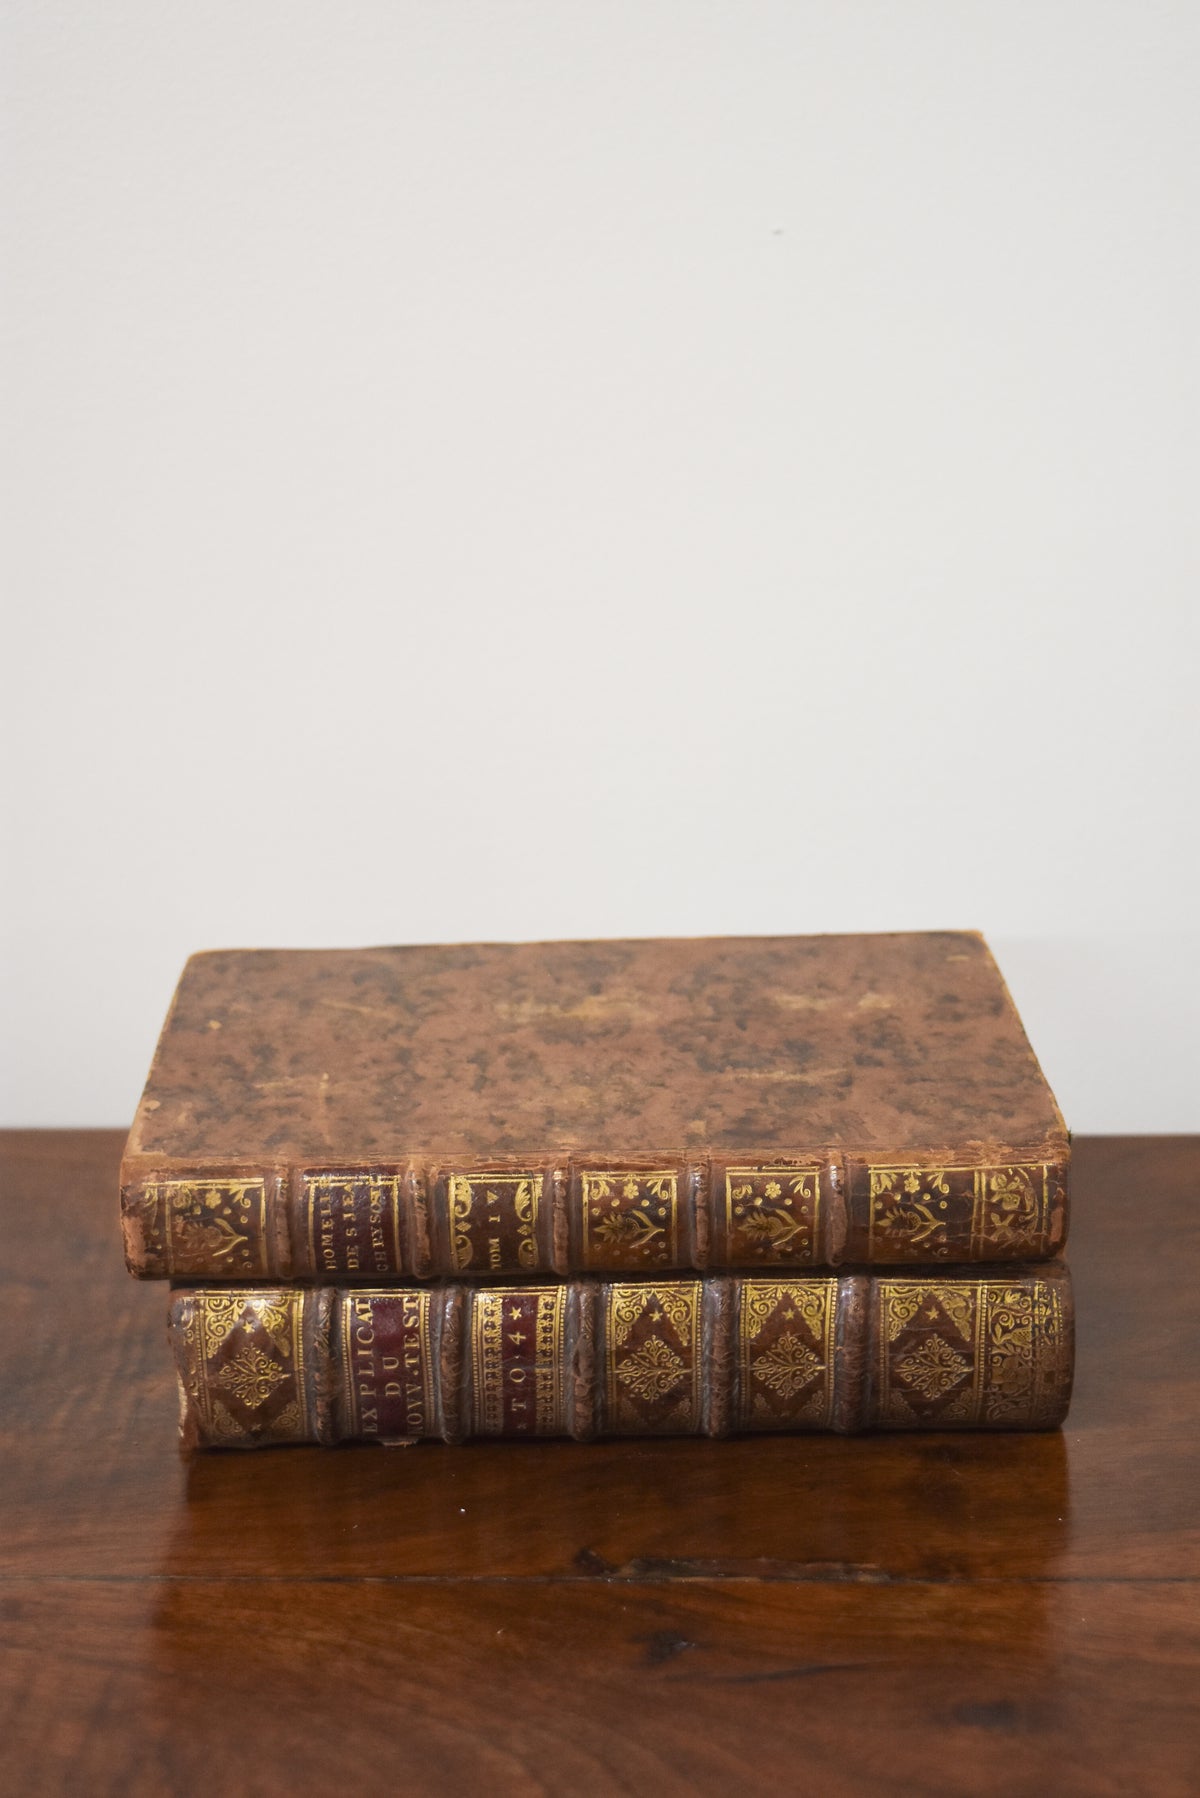 Pair of Antique Leatherback Books Signed "Rolland"